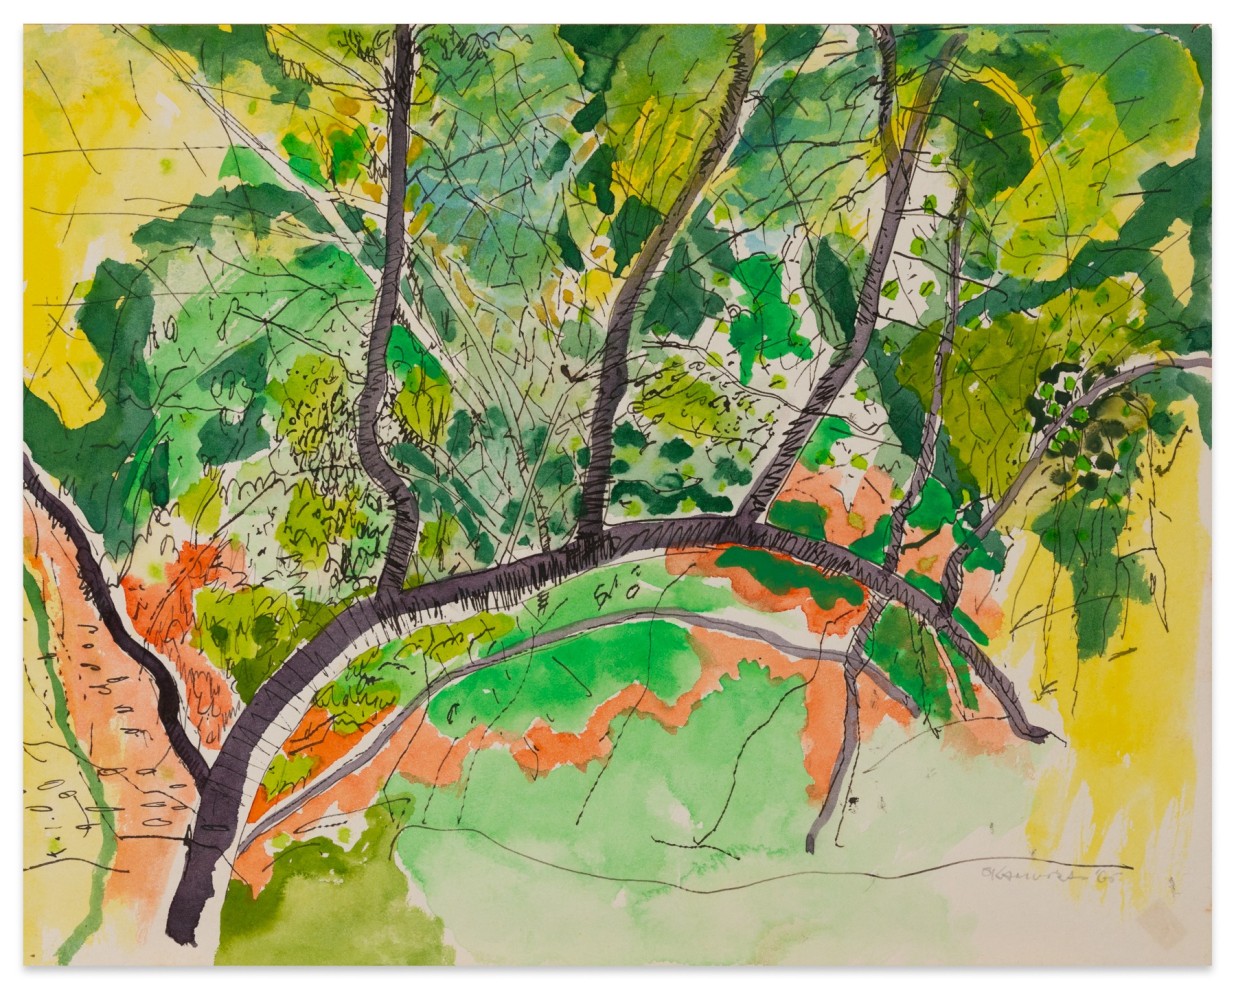 Arthur Okamura, Along Dipsea, 1966, watercolor and ink on paper, 10 1/2 x 13 1/4 inches